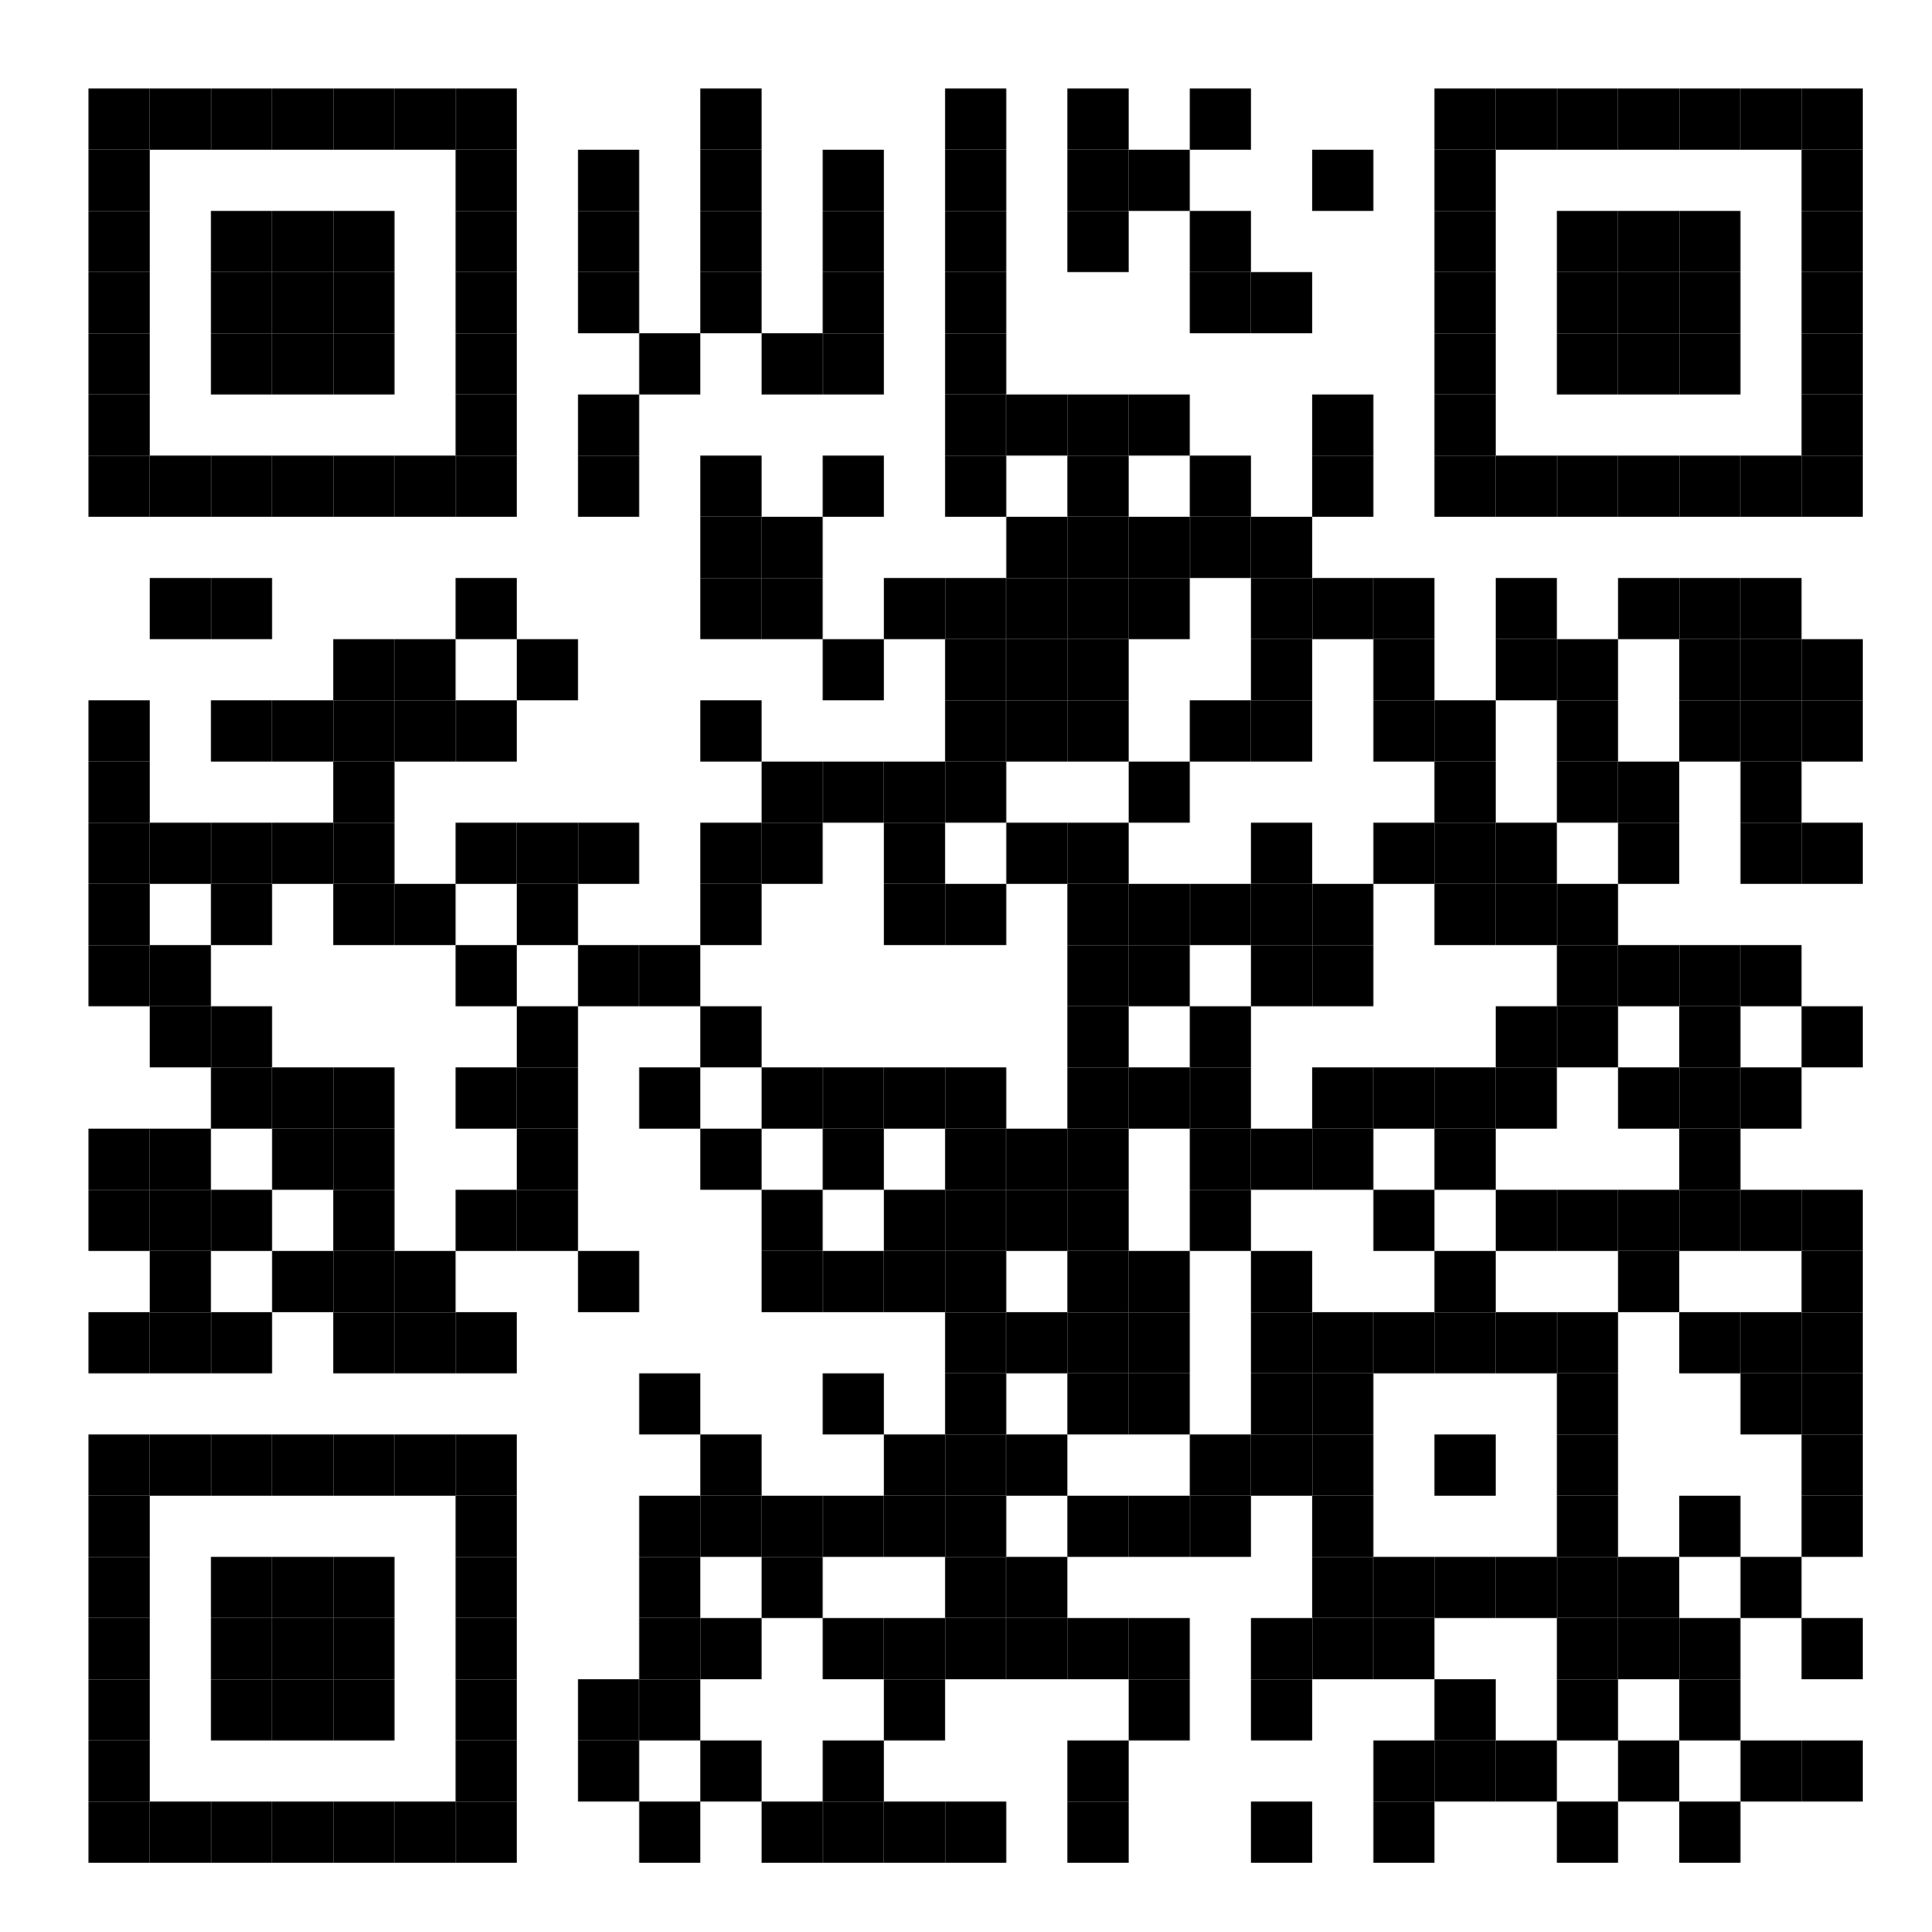 Android QR code